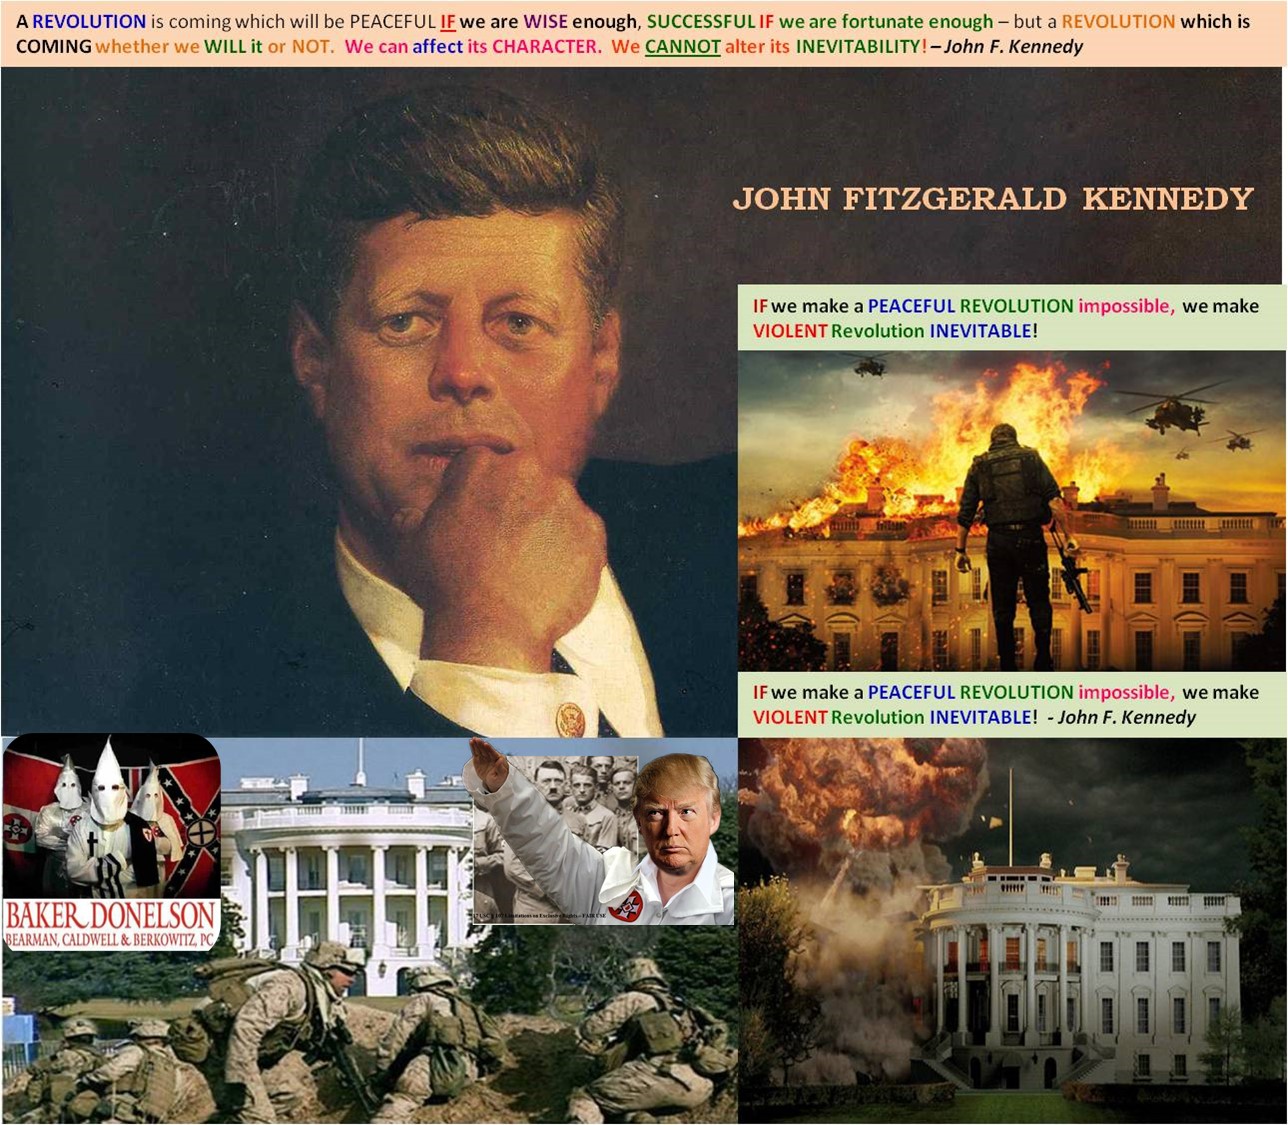 USA PRESIDENT JOHN F KENNEDY PROPHESY OF A DESPOTISM GOVERNMENT OVERTHROW